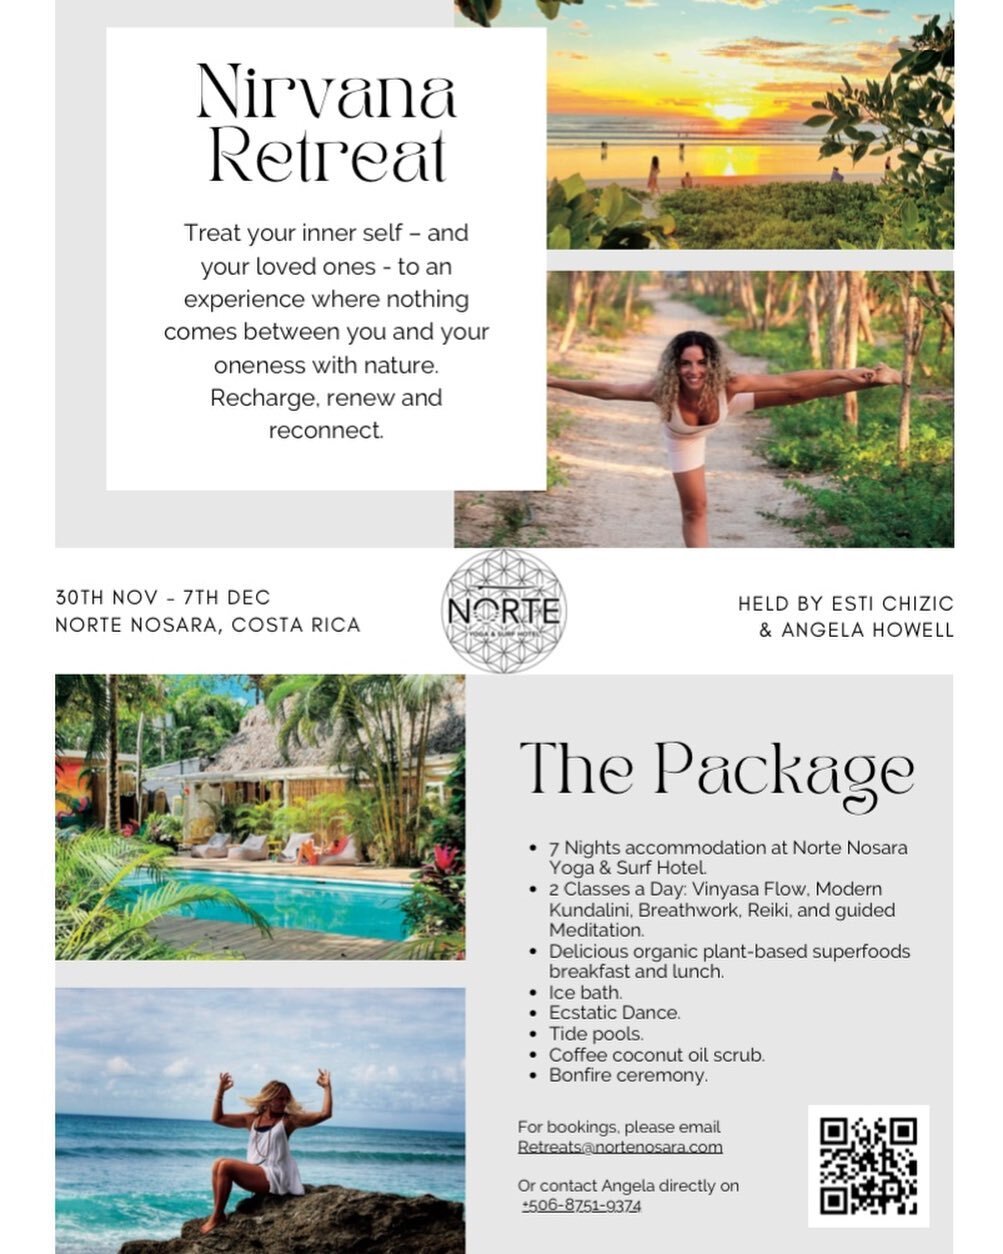 So excited about this !! ❤️🙌👏

Join myself &amp; @estichizic for this experience @nortenosara 💕

Nirvana Retreat 
November 30th - December 7th 

A week of Yoga, Breathwork, Reiki, Guided Meditations, Organic plant-based superfoods, sunsets, ocean 